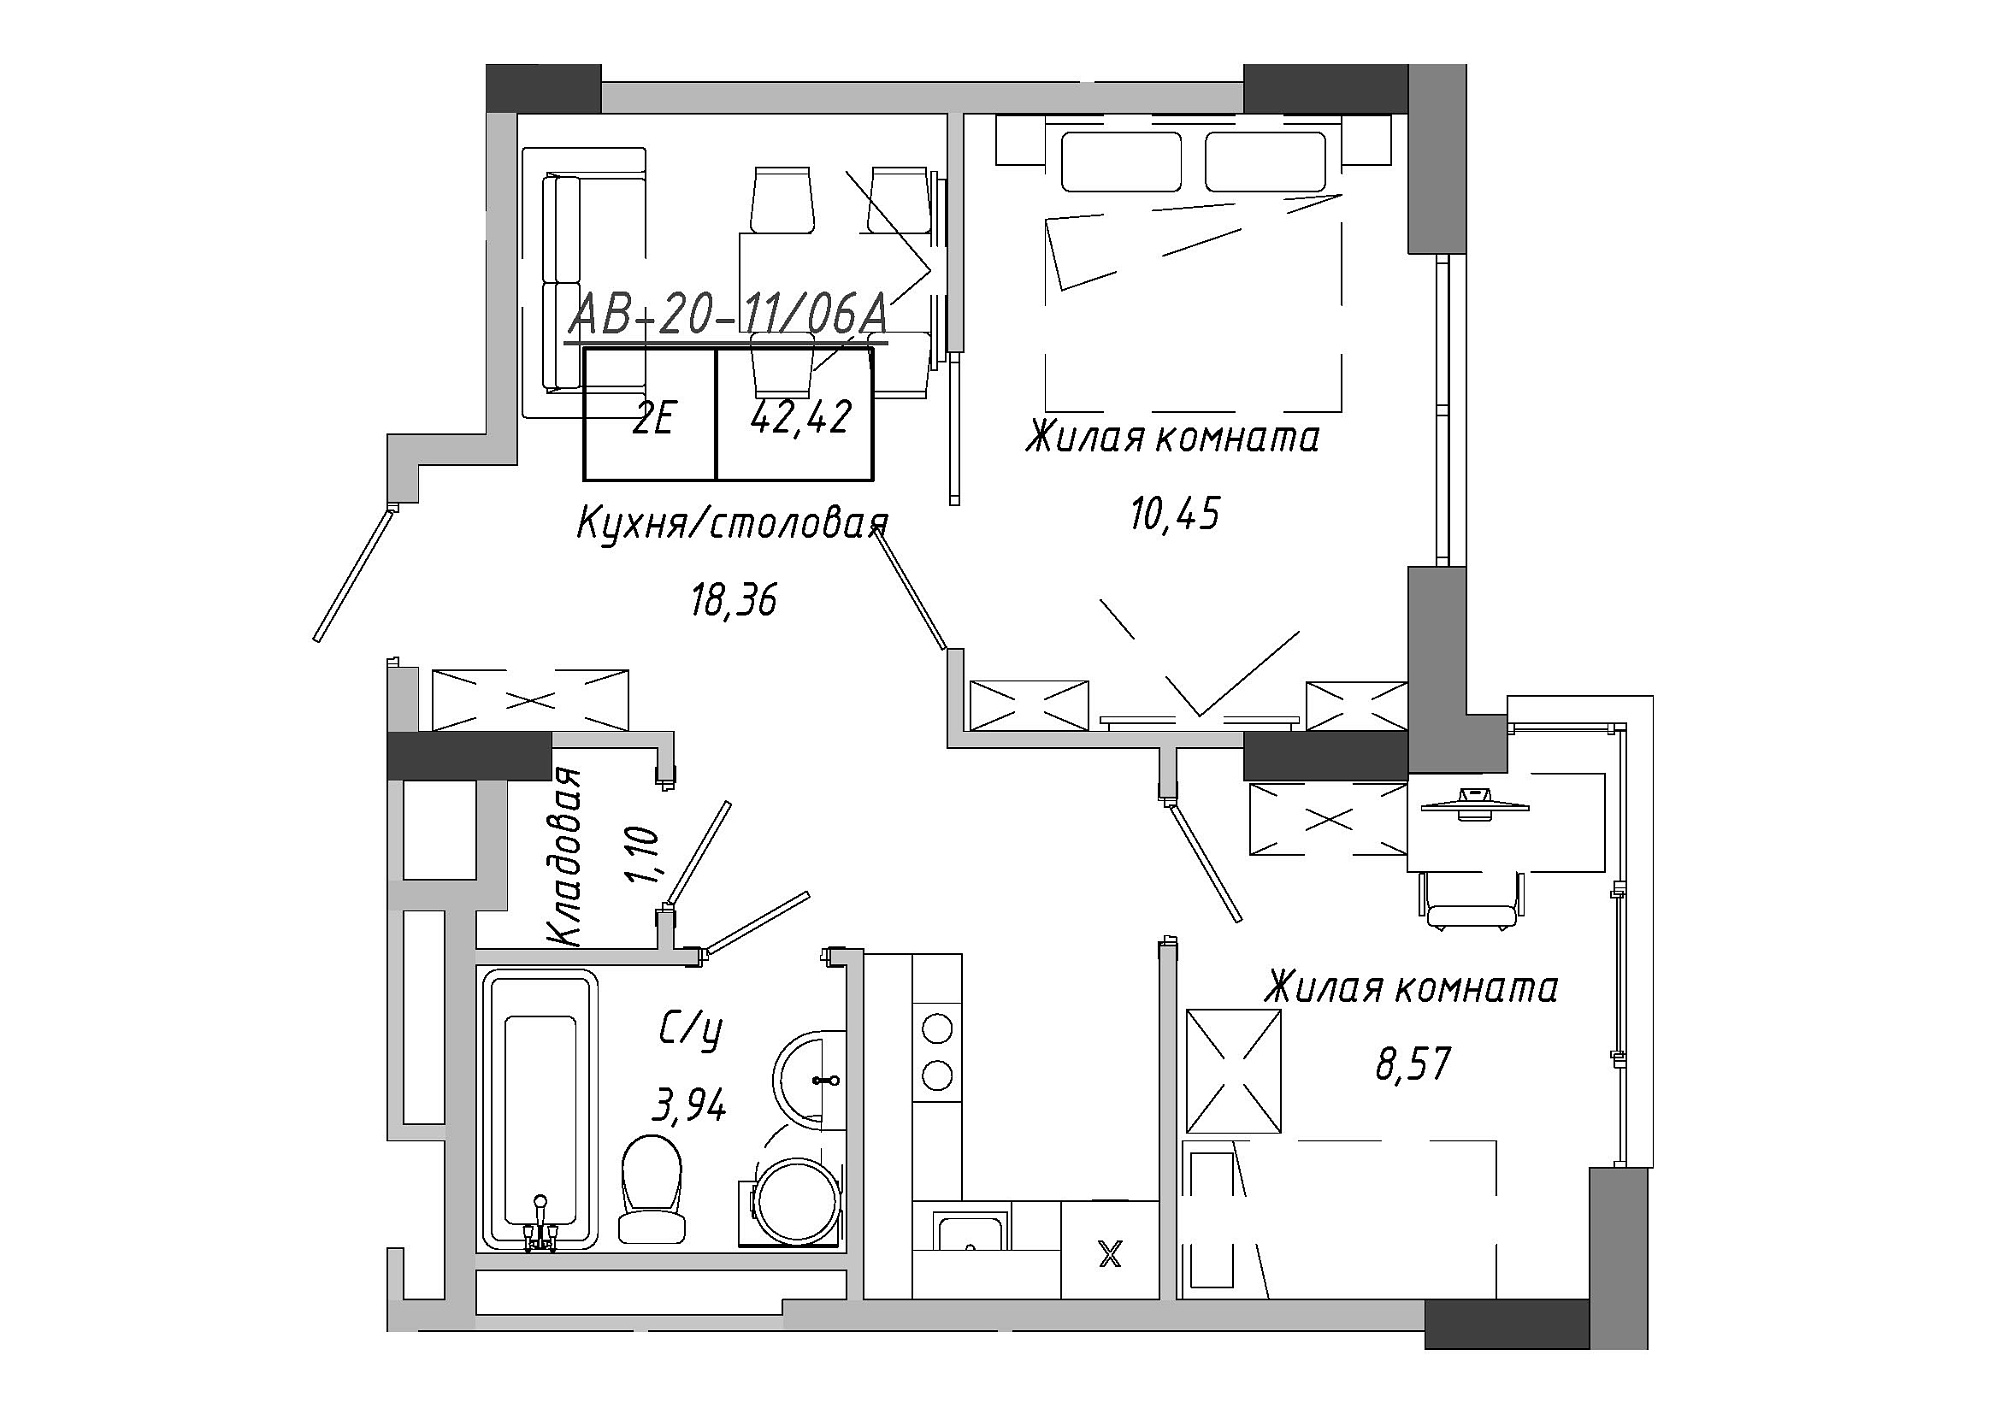 Planning 2-rm flats area 42.85m2, AB-20-11/0006а.